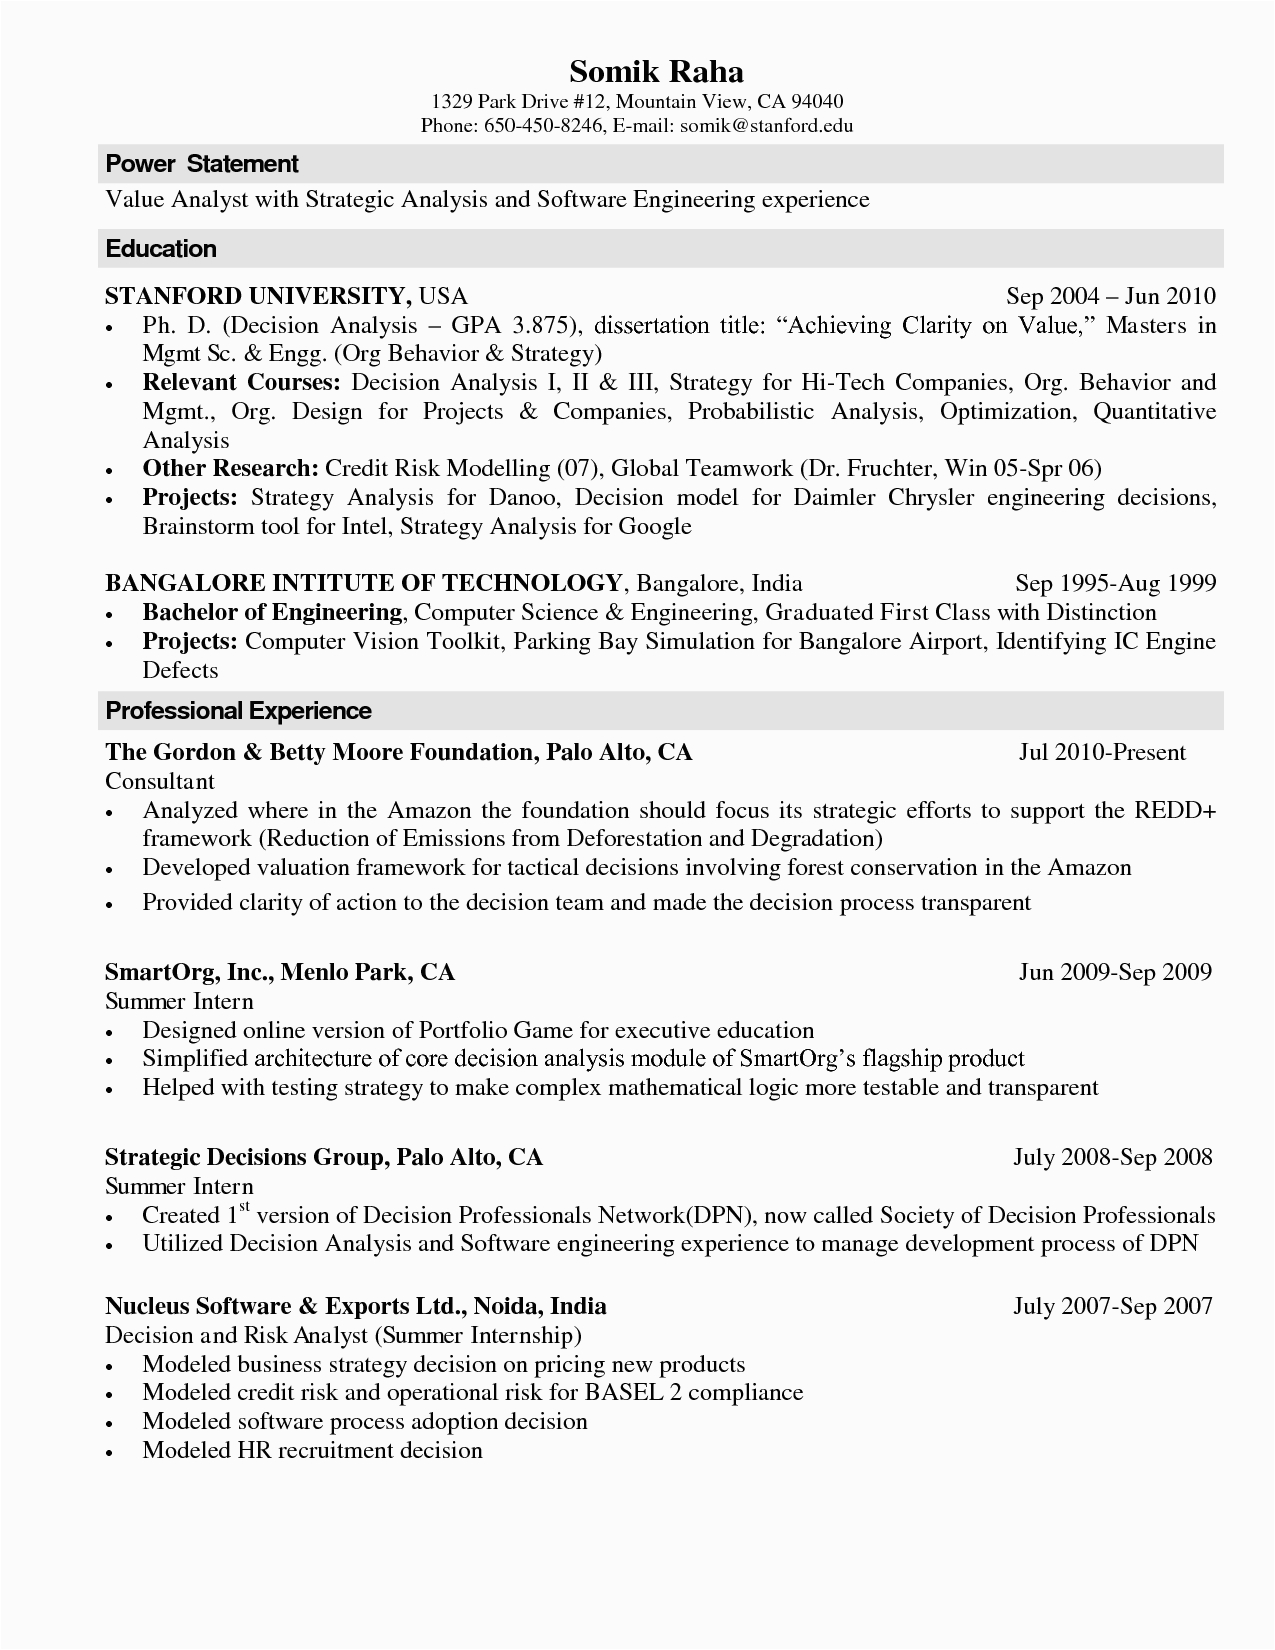 Resume Samples for Computer Science Engineers Puter Science Resume Templates Resume